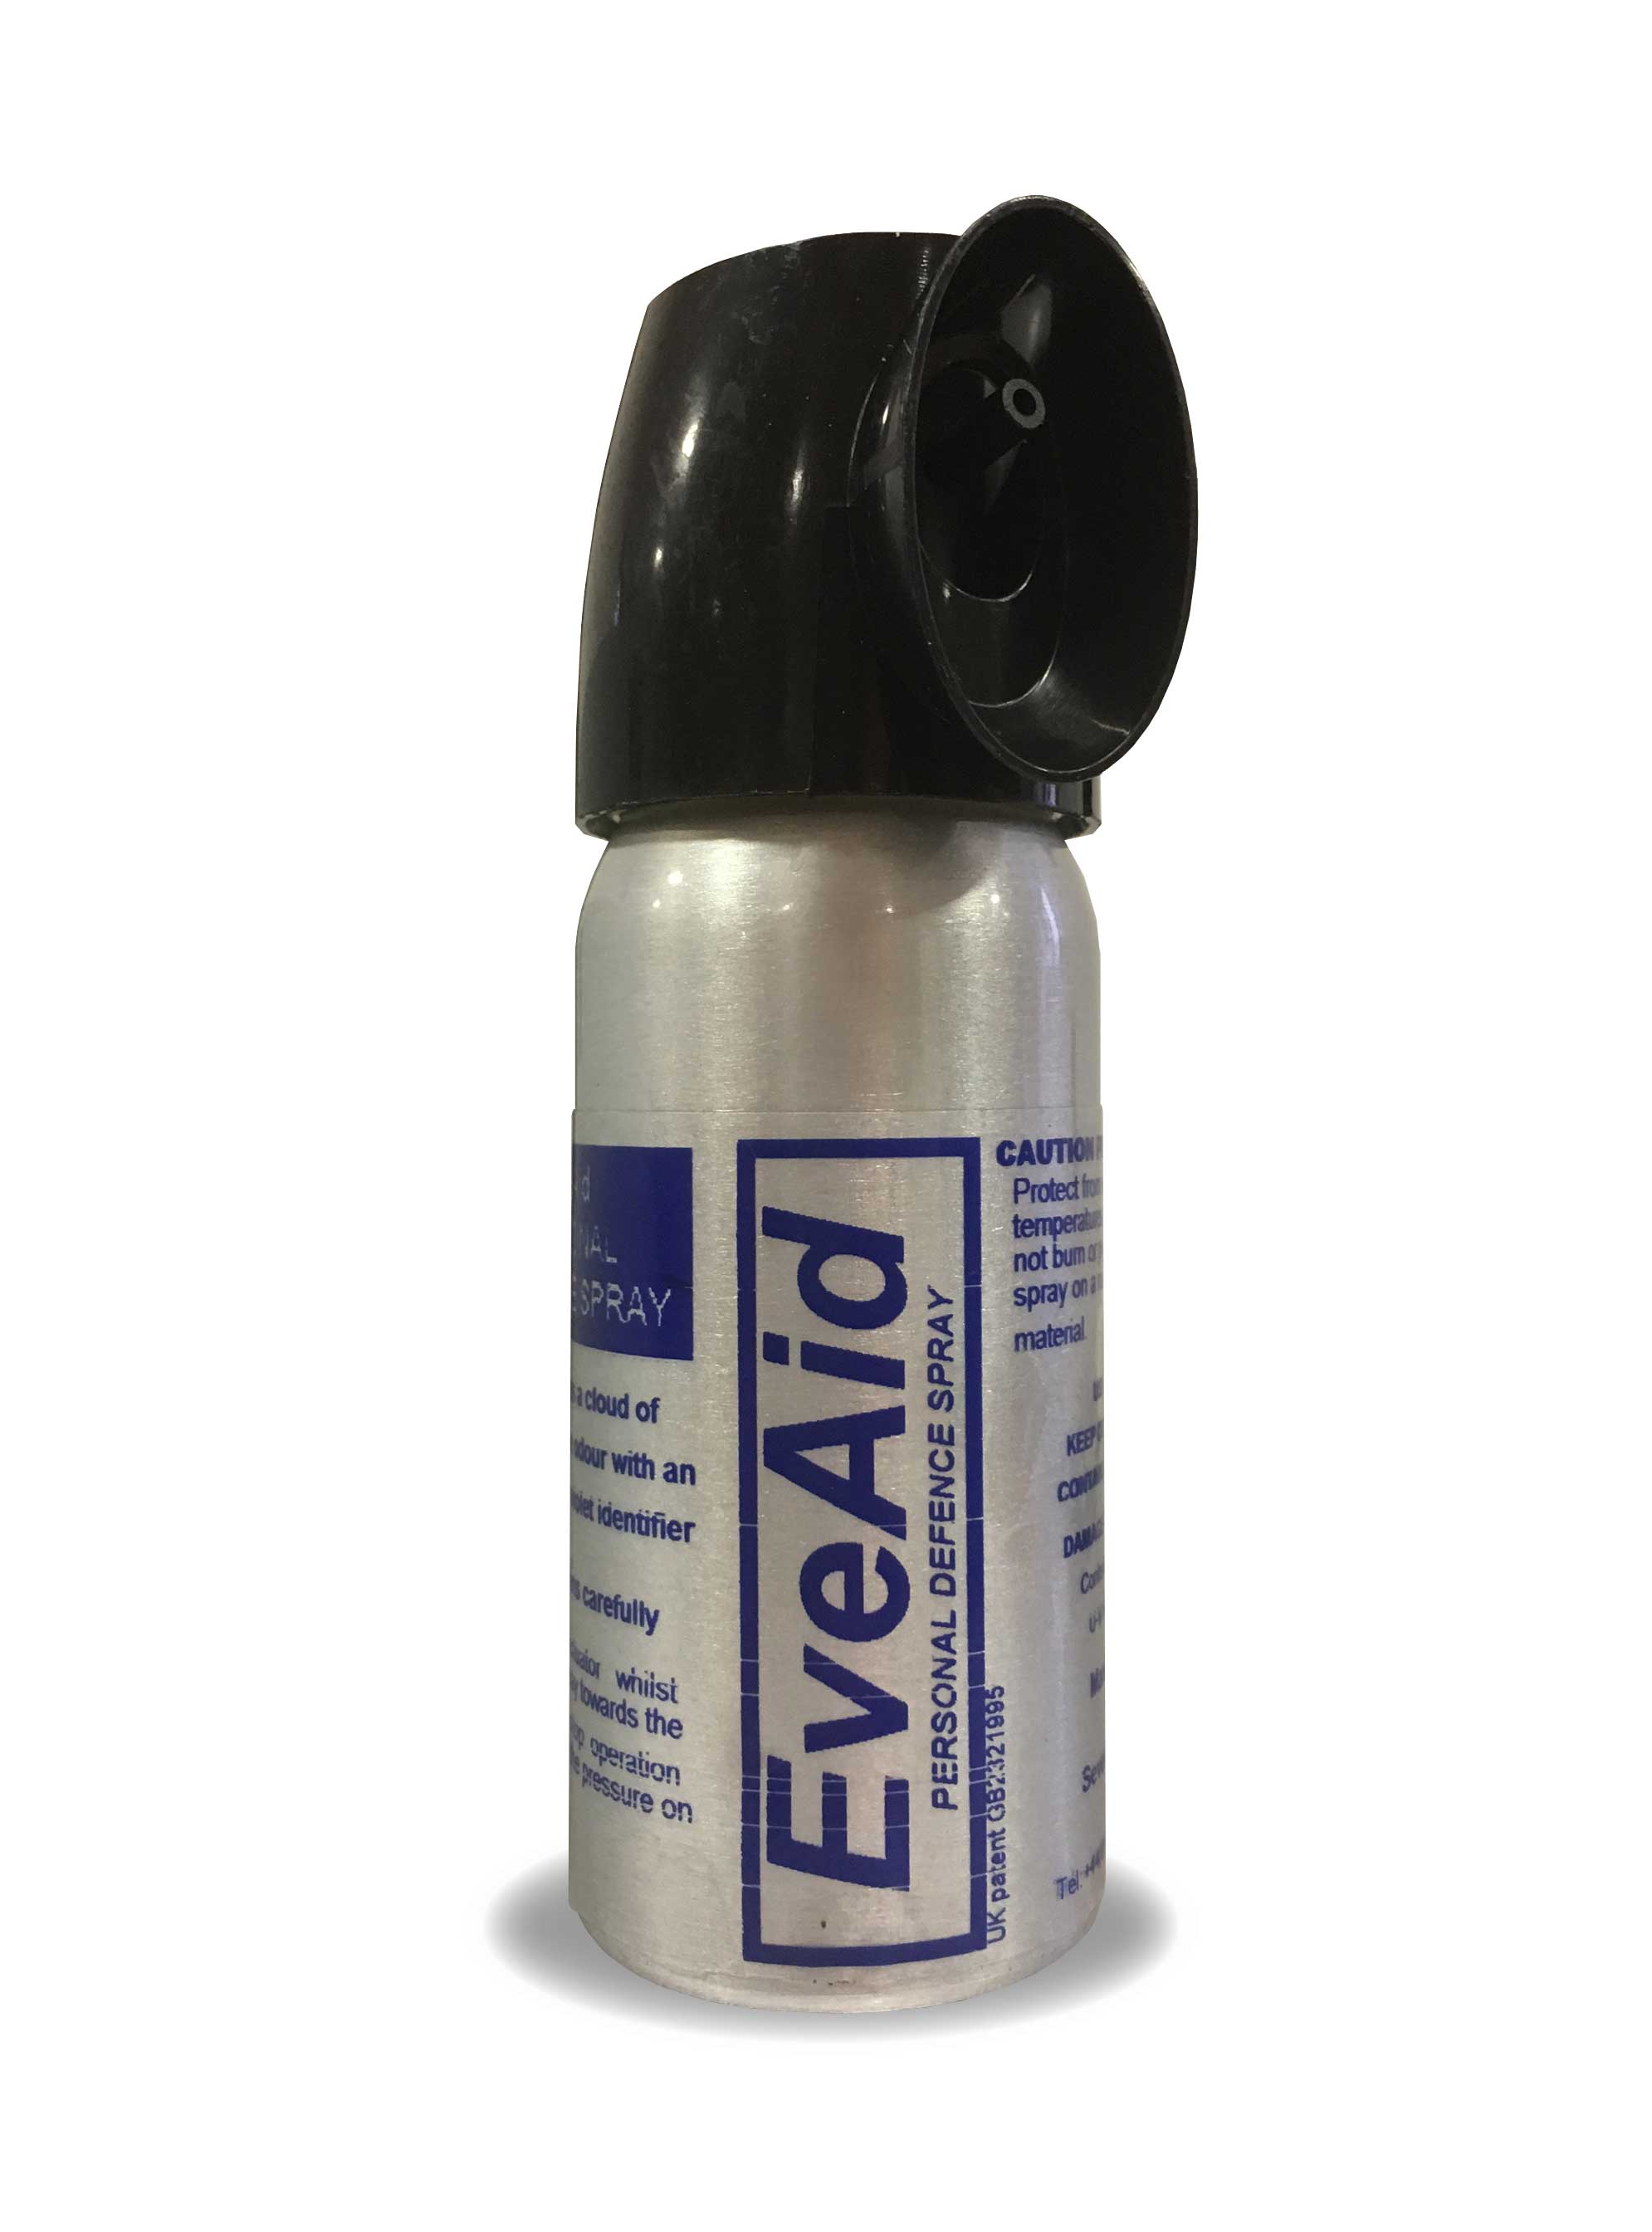 Vestguard Eveaid Personal Defence Spray For Protection From Attacks And Rape Deterrent Triple Action Www Vestguard Co Uk